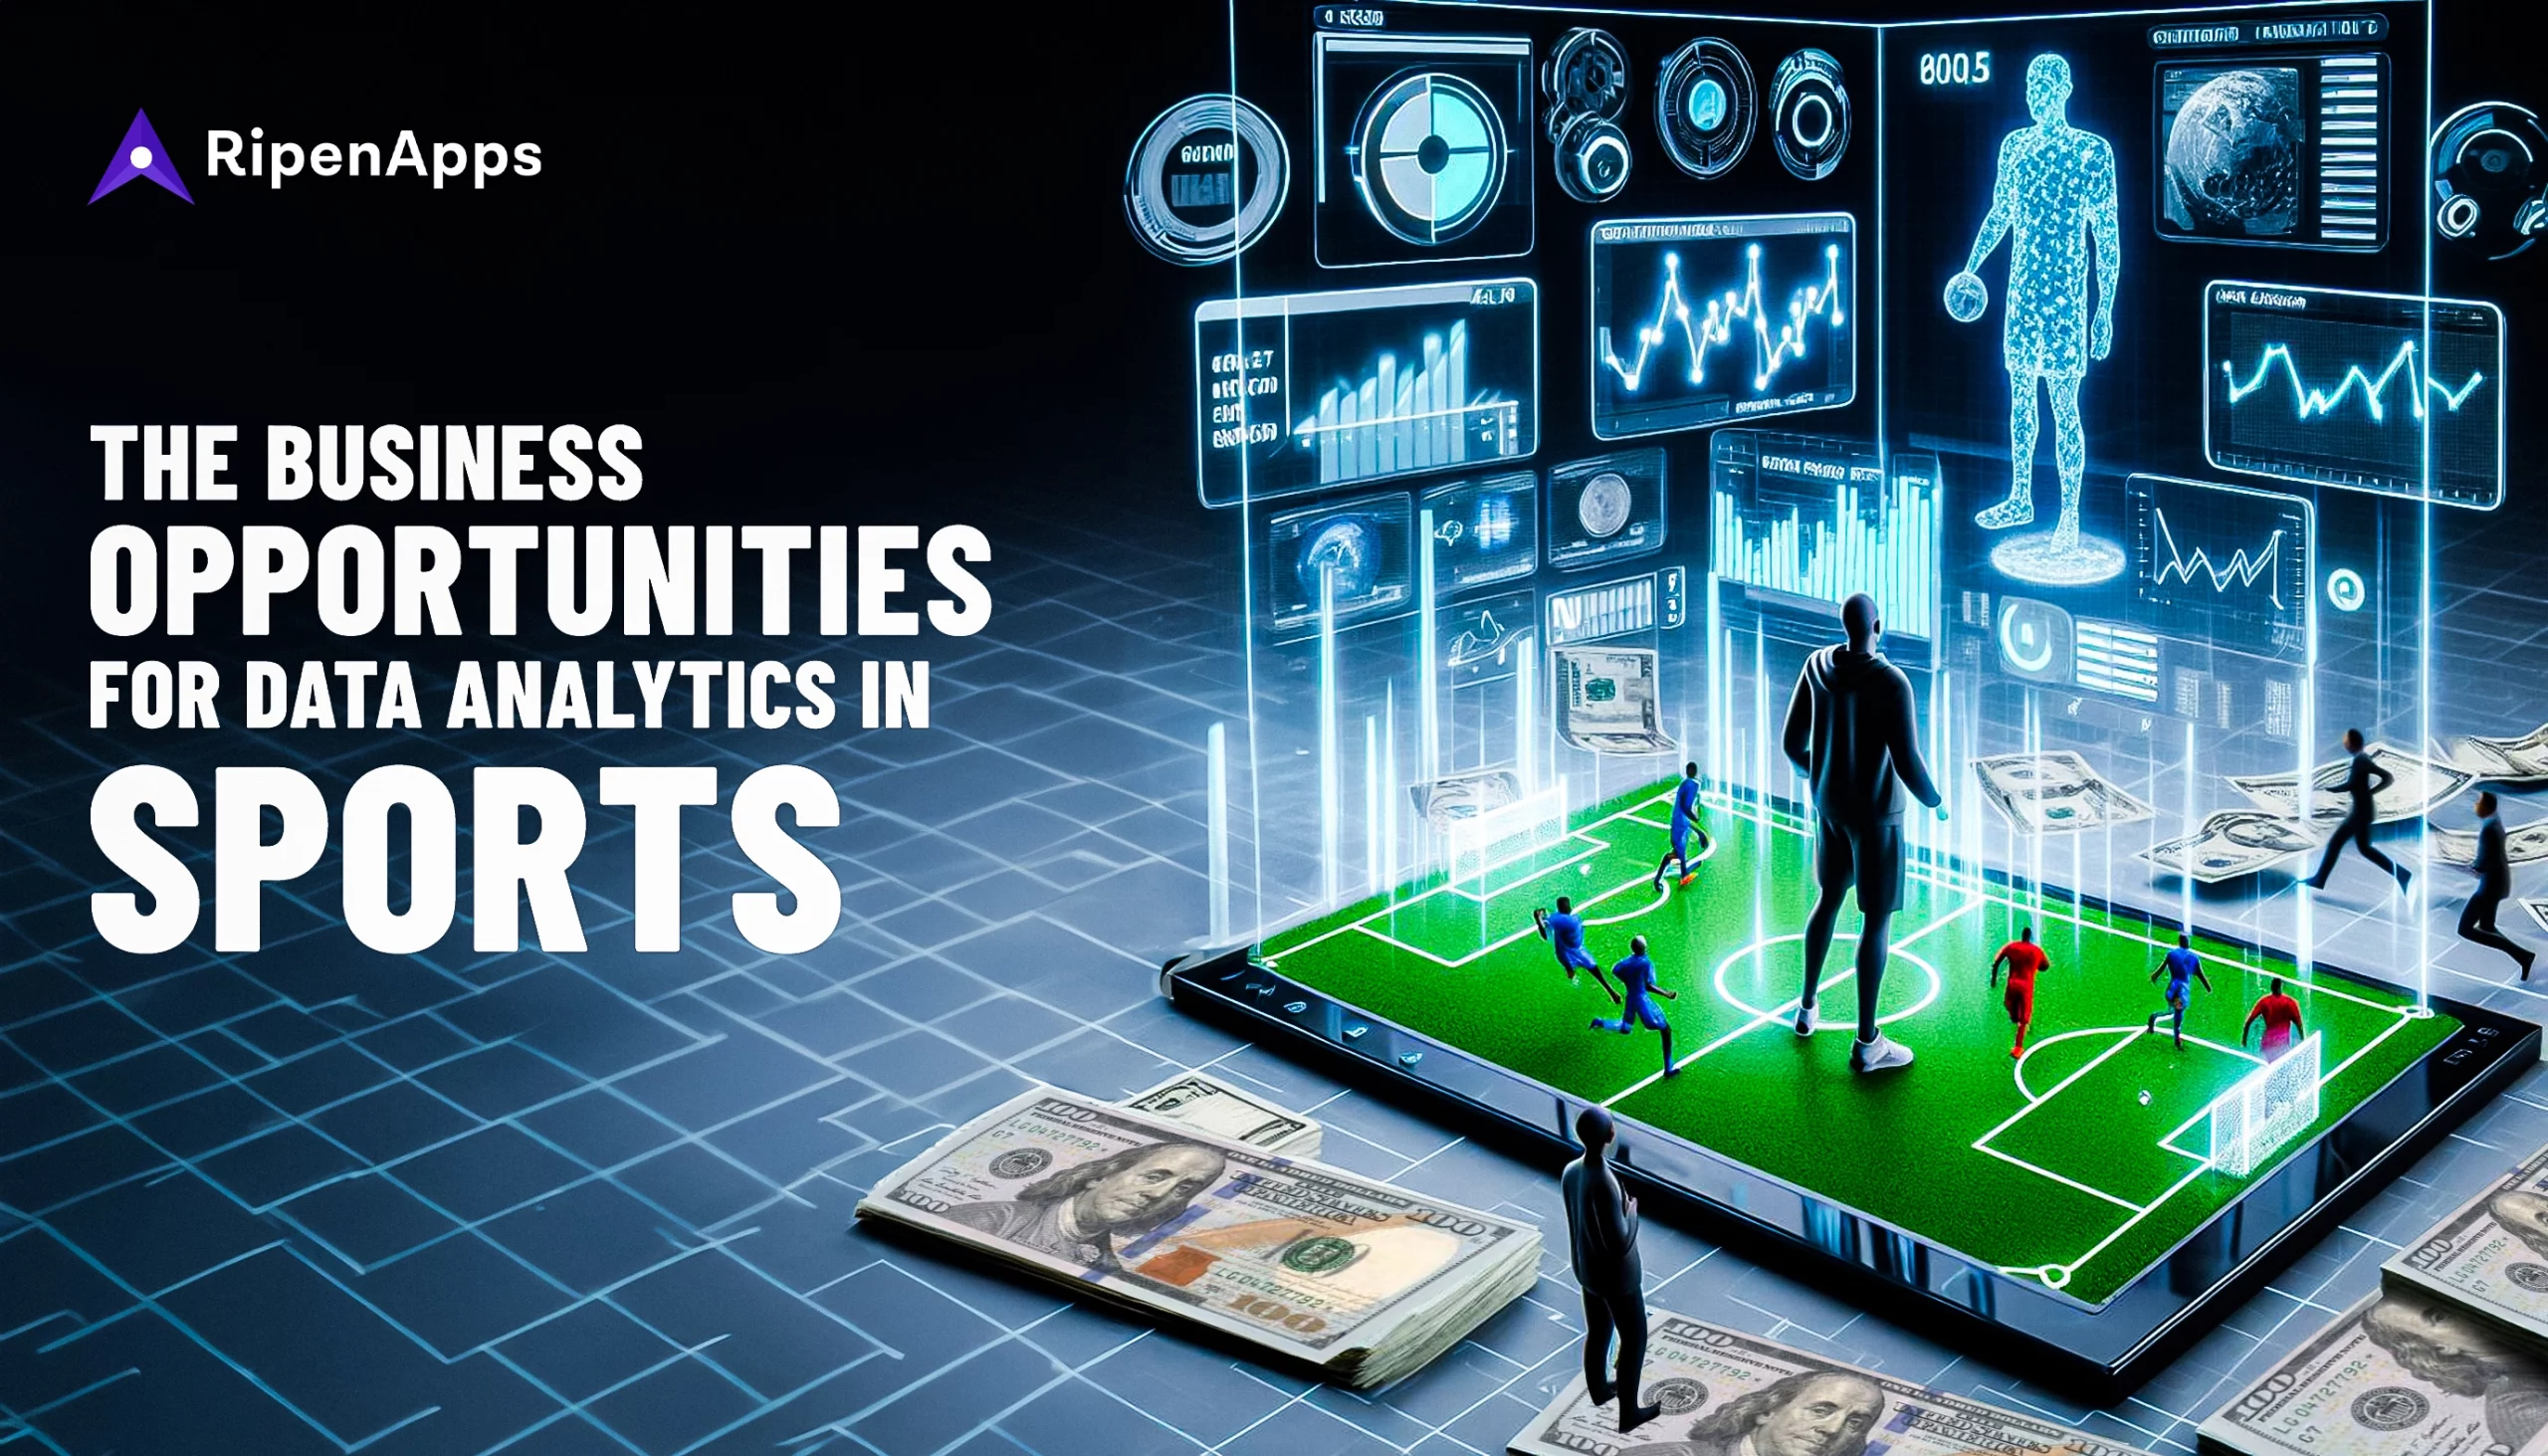 The Business opportunities for data analytics in Sports